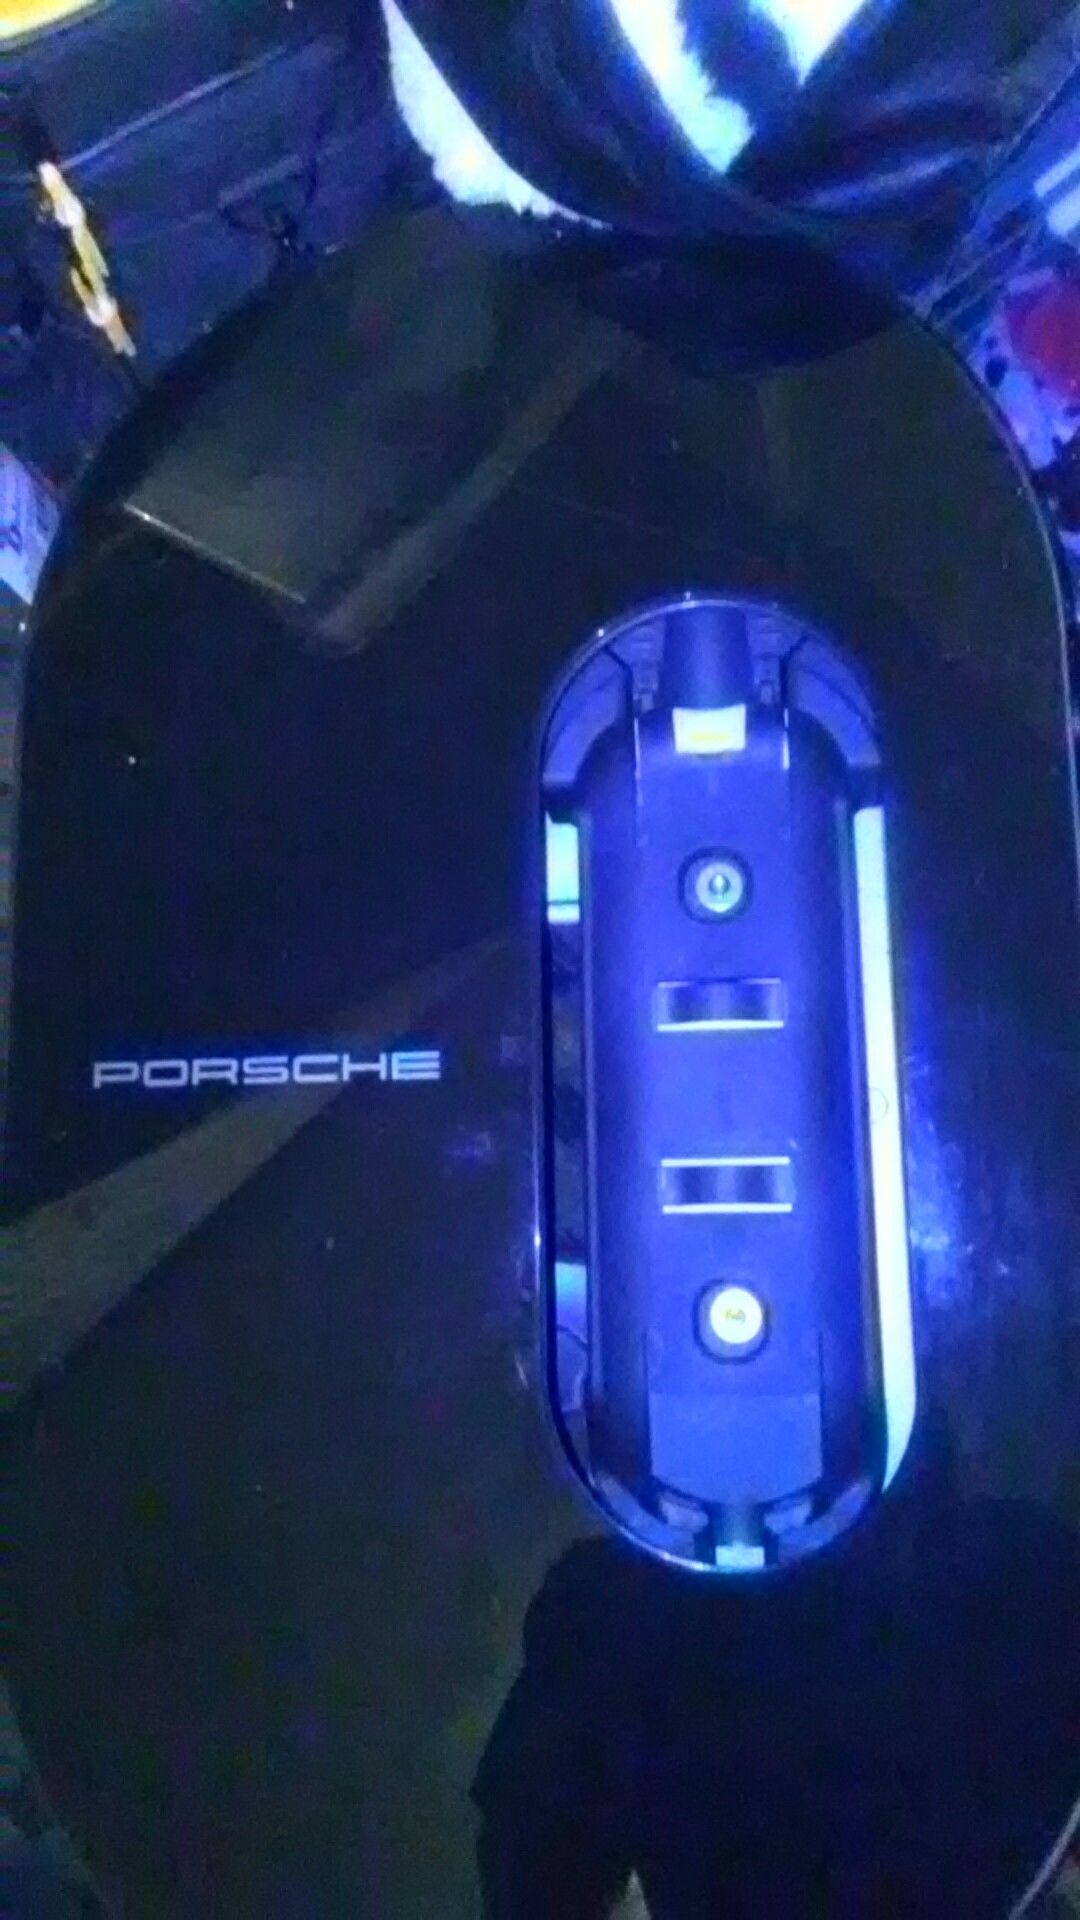 the porsh thing is a battery charger for a porsch